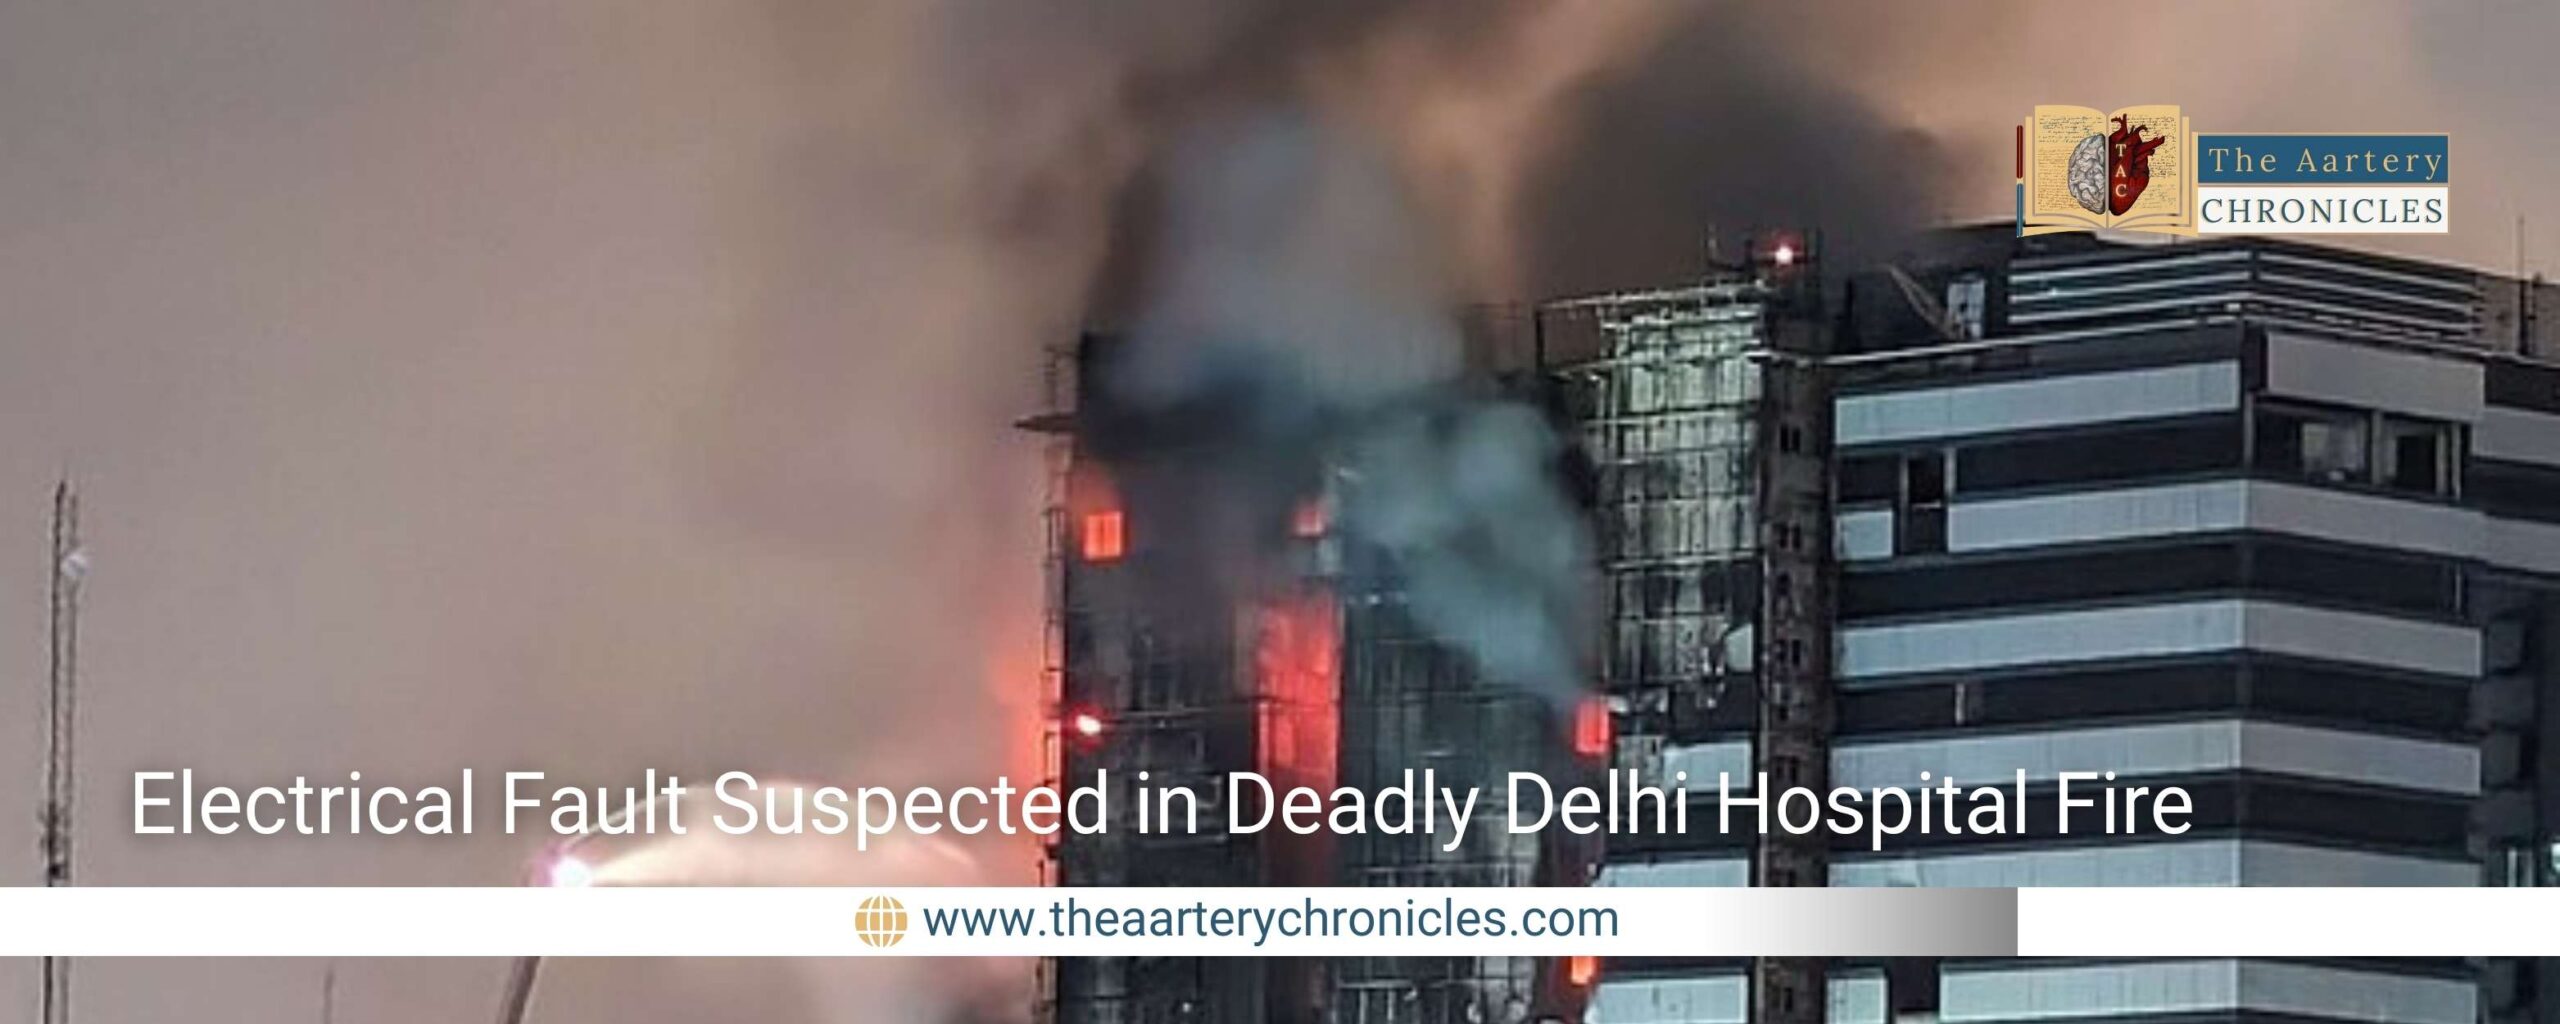 Electrical-Fault-Suspected-in-Deadly-Delhi-Hospital-Fire-The-Aartery-Chronicles-TAC